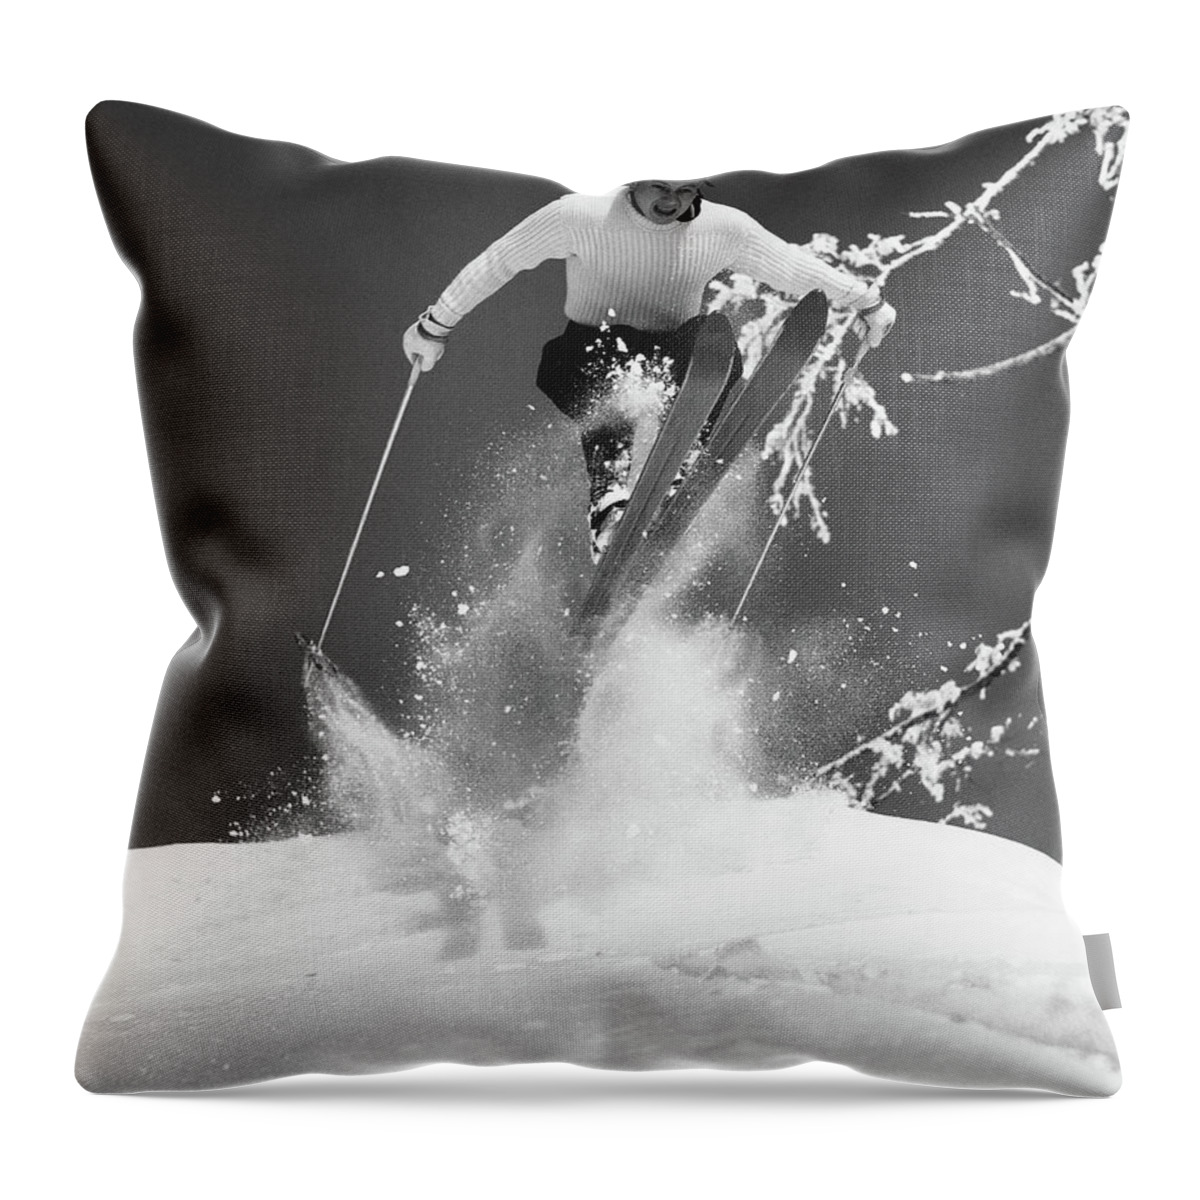 Skiing Throw Pillow featuring the photograph Man Jumping Through Air On Skis by Stockbyte